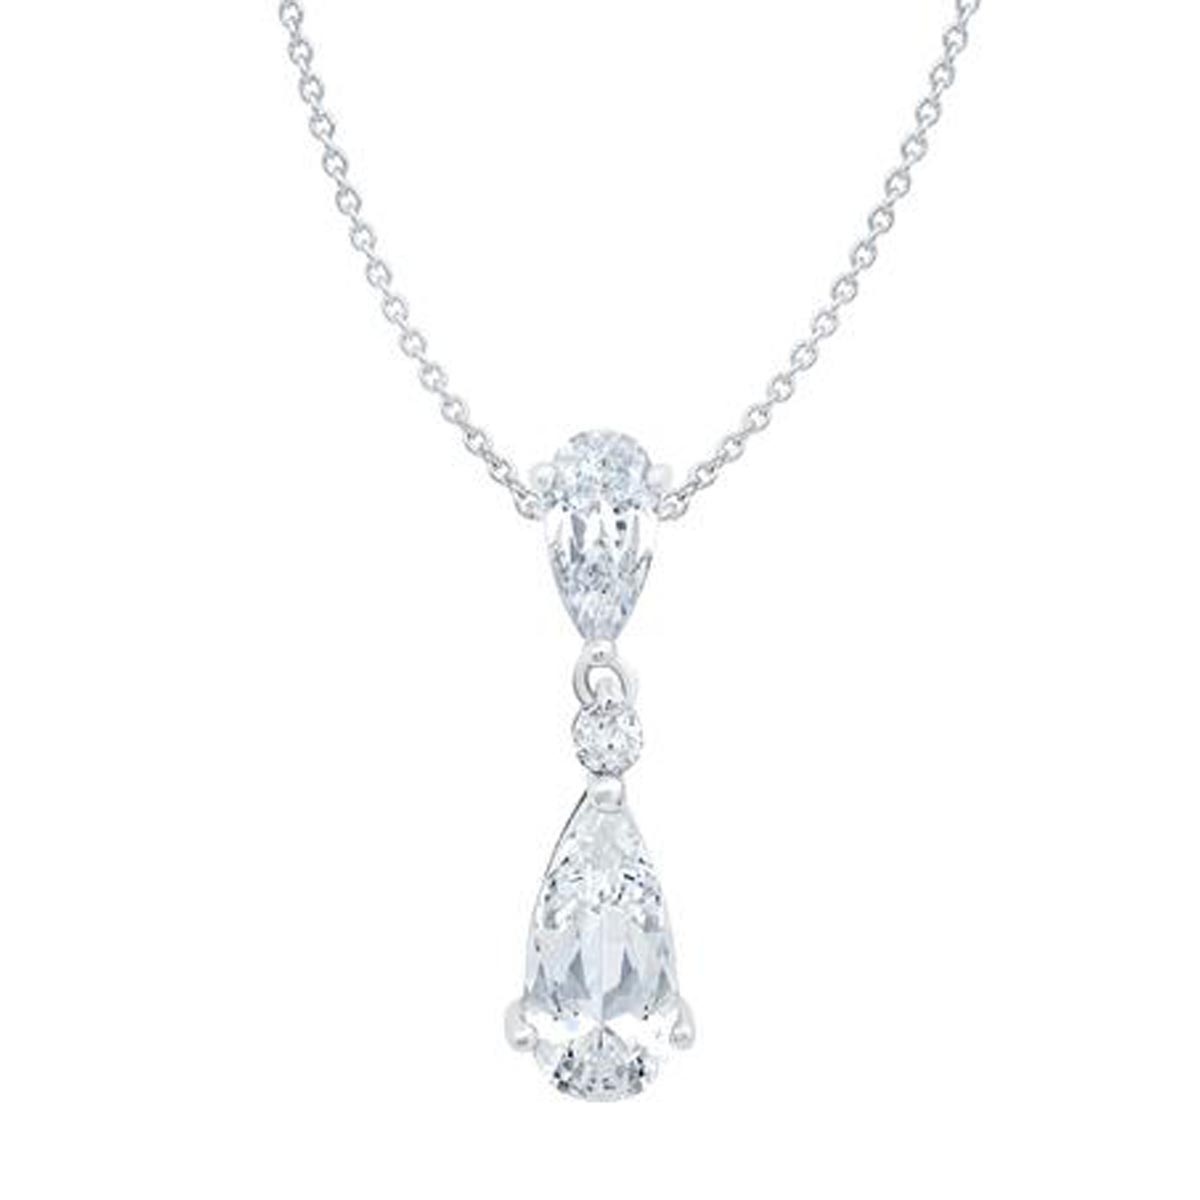 Crislu Cubic Zirconia Double Pear Drop Necklace in Sterling Silver with a Platinum Finish